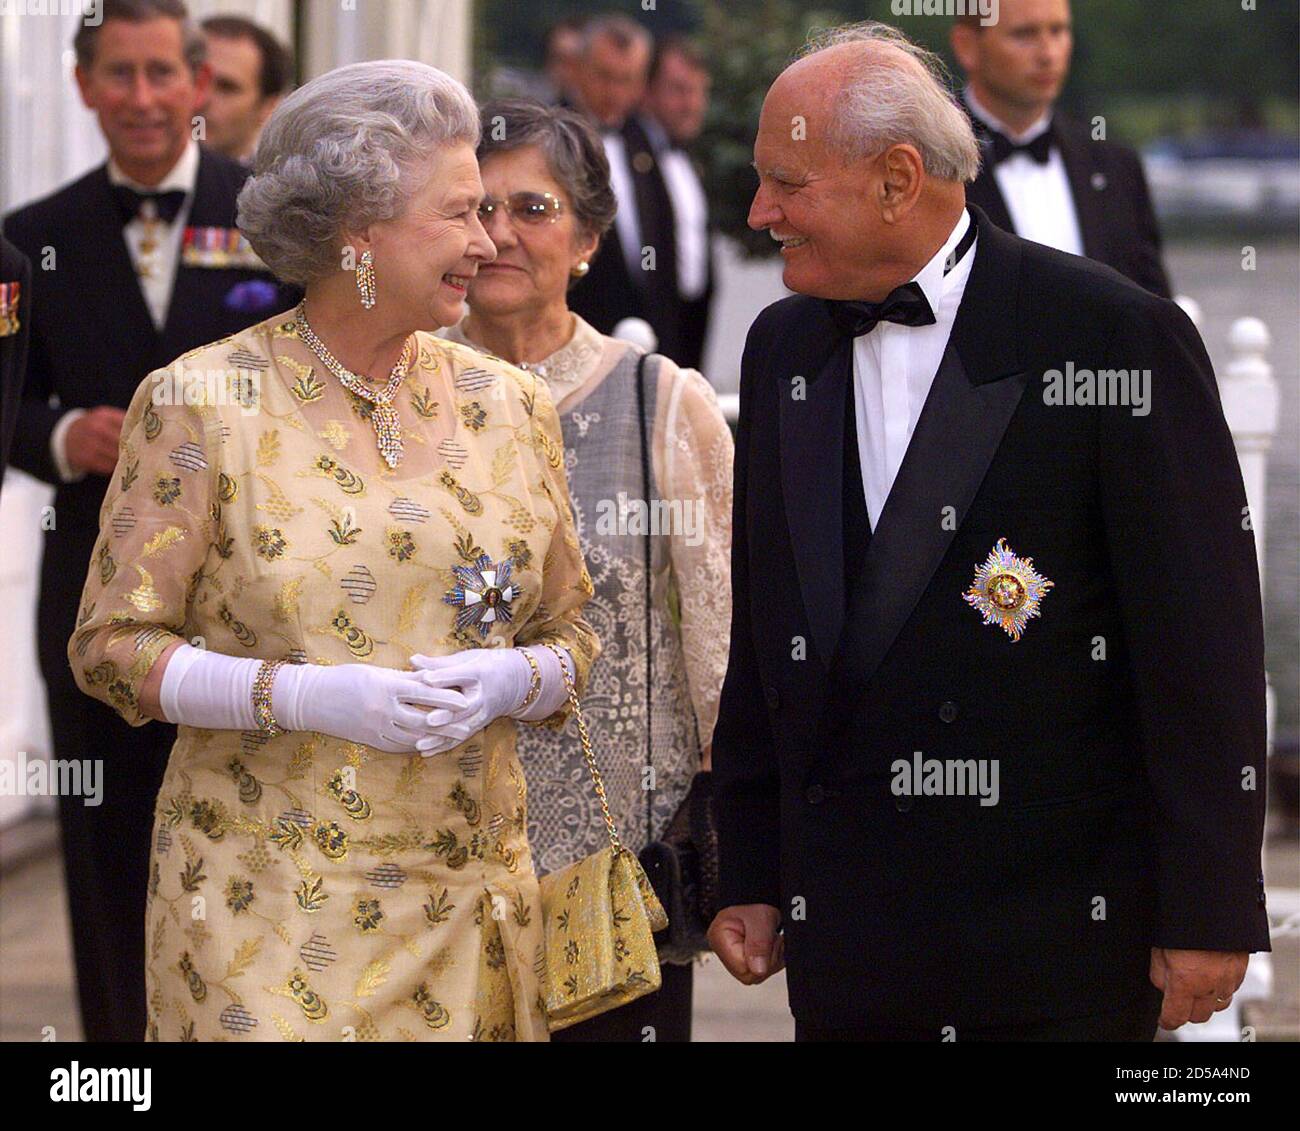 Britain's Queen Elizabeth jokes with Hungarian President Mr Goncz on  arrival at the Compleat Angler restaurant in Marlow June 24. Mr Goncz has  chosen to host dinner for The Queen in Marlow